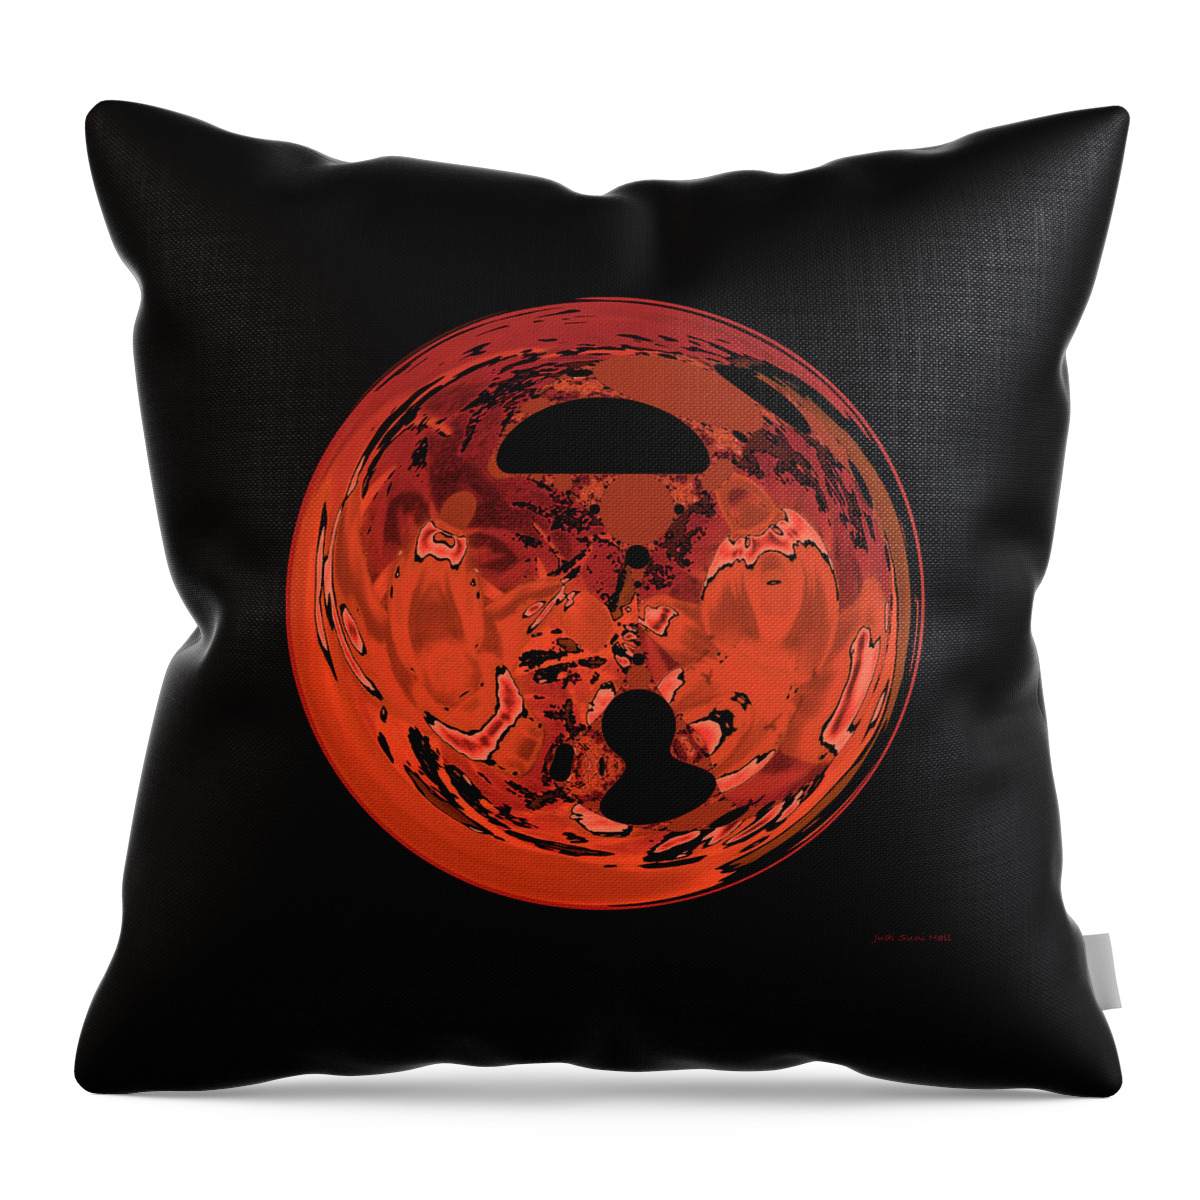 Disk Throw Pillow featuring the digital art Copper Disk Abstract by Judi Suni Hall